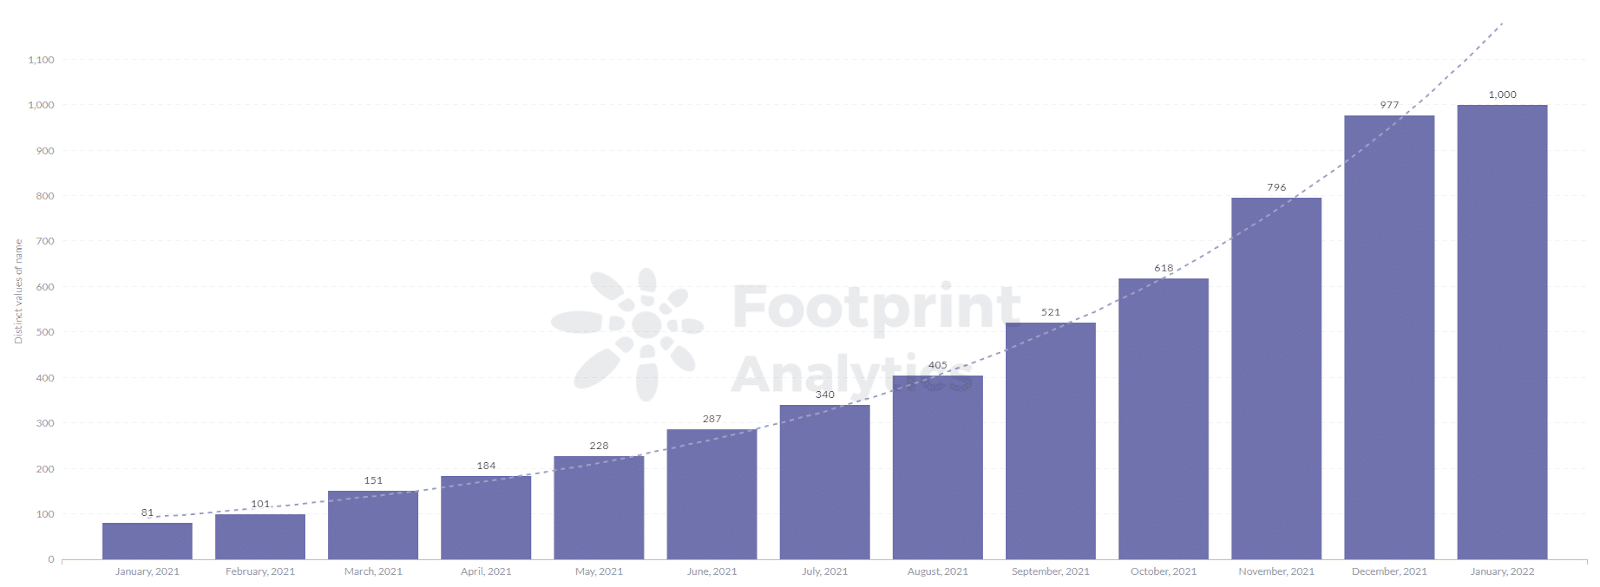 Footprint Analytics - The Growing Trend of DeFi Projects